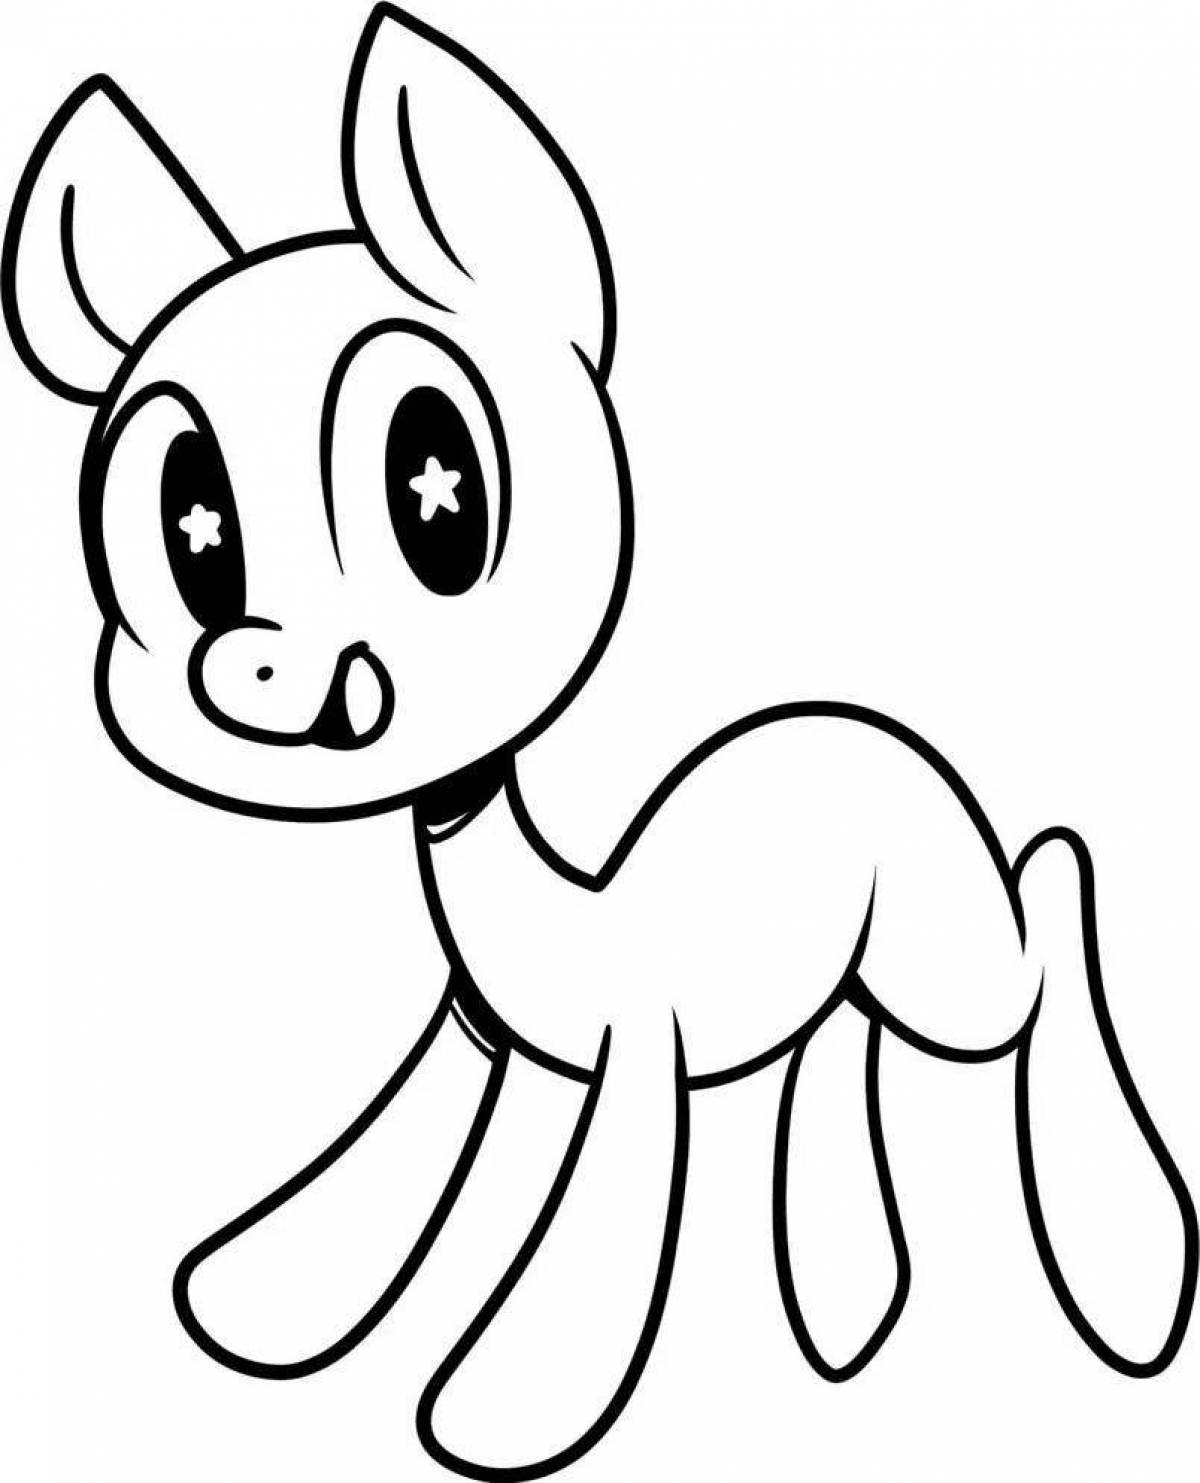 Coloring page gorgeous pony mannequin